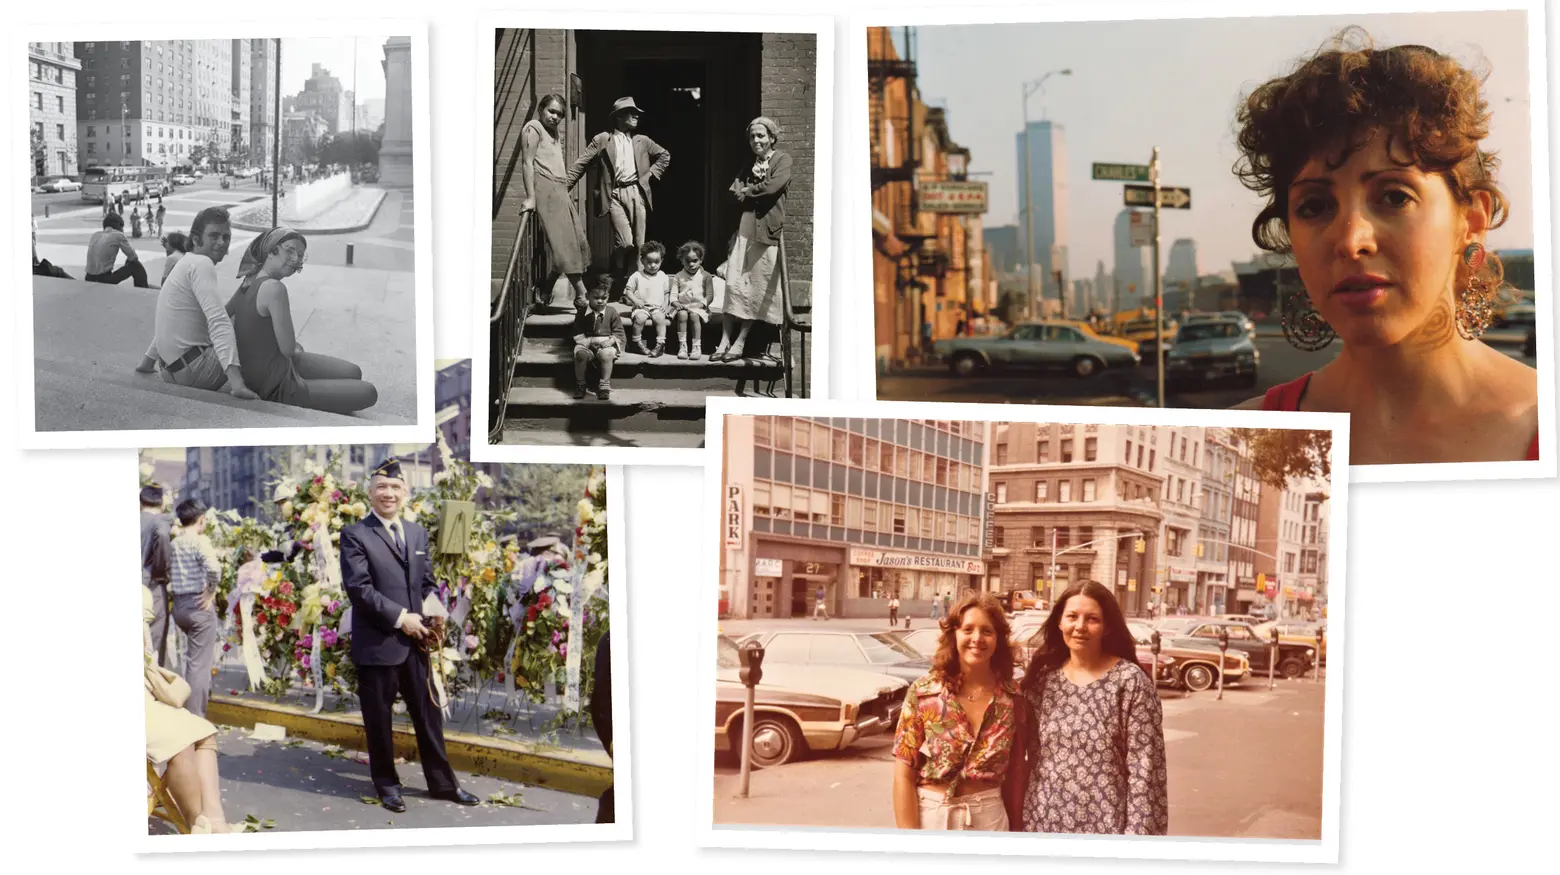 Urban Archive invites New Yorkers to submit photos for their new crowdsourced history project